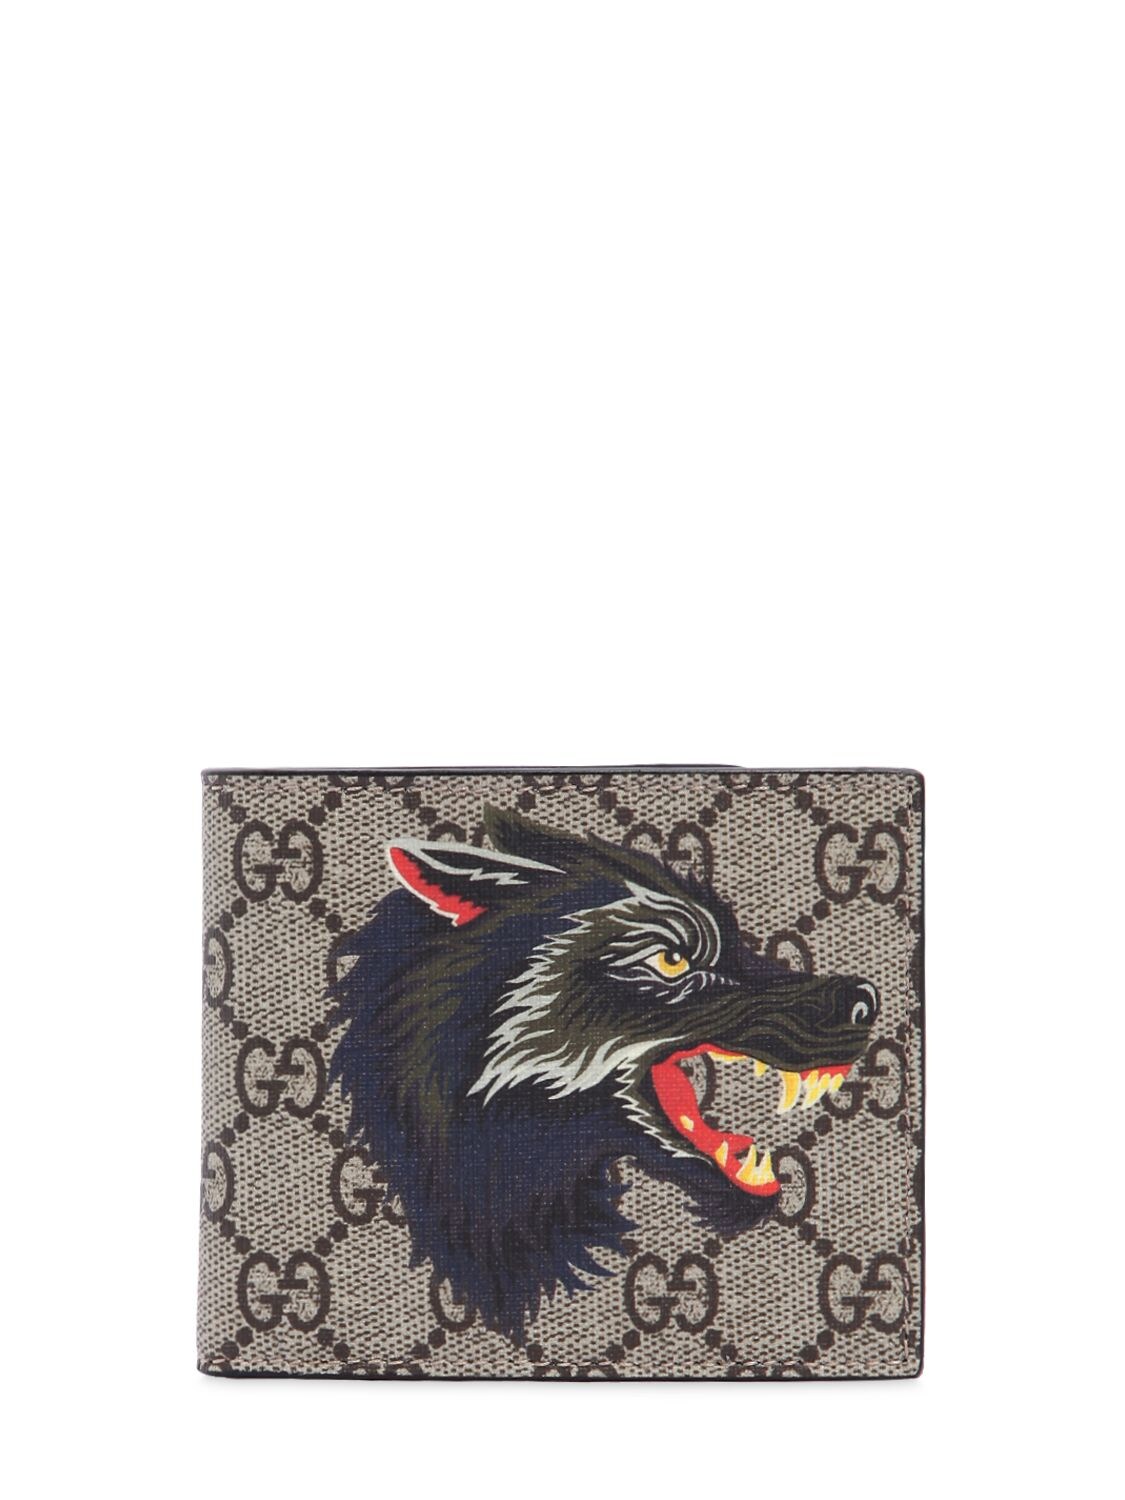 GUCCI WOLF PRINTED GG SUPREME CLASSIC WALLET,67IH0L018-ODY5Nw2